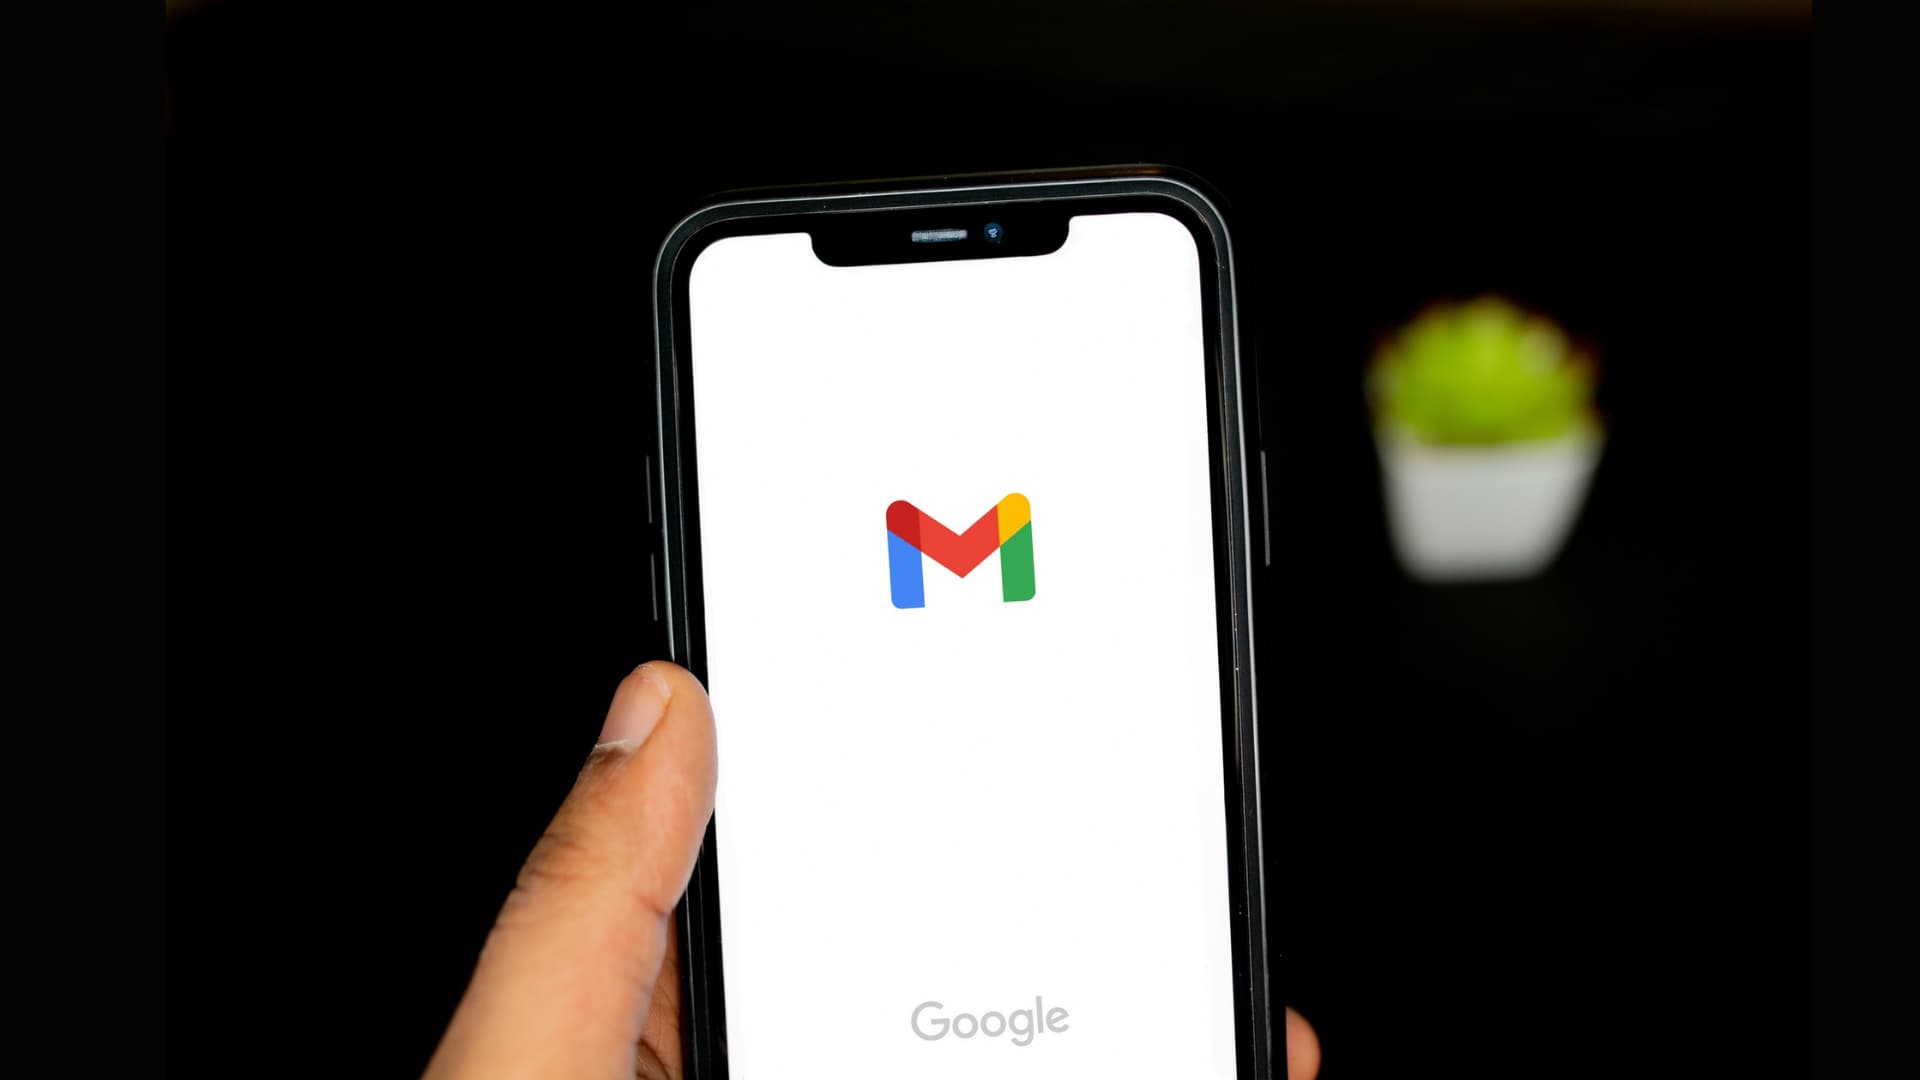 A hand holding iPhone with Gmail logo on the screen